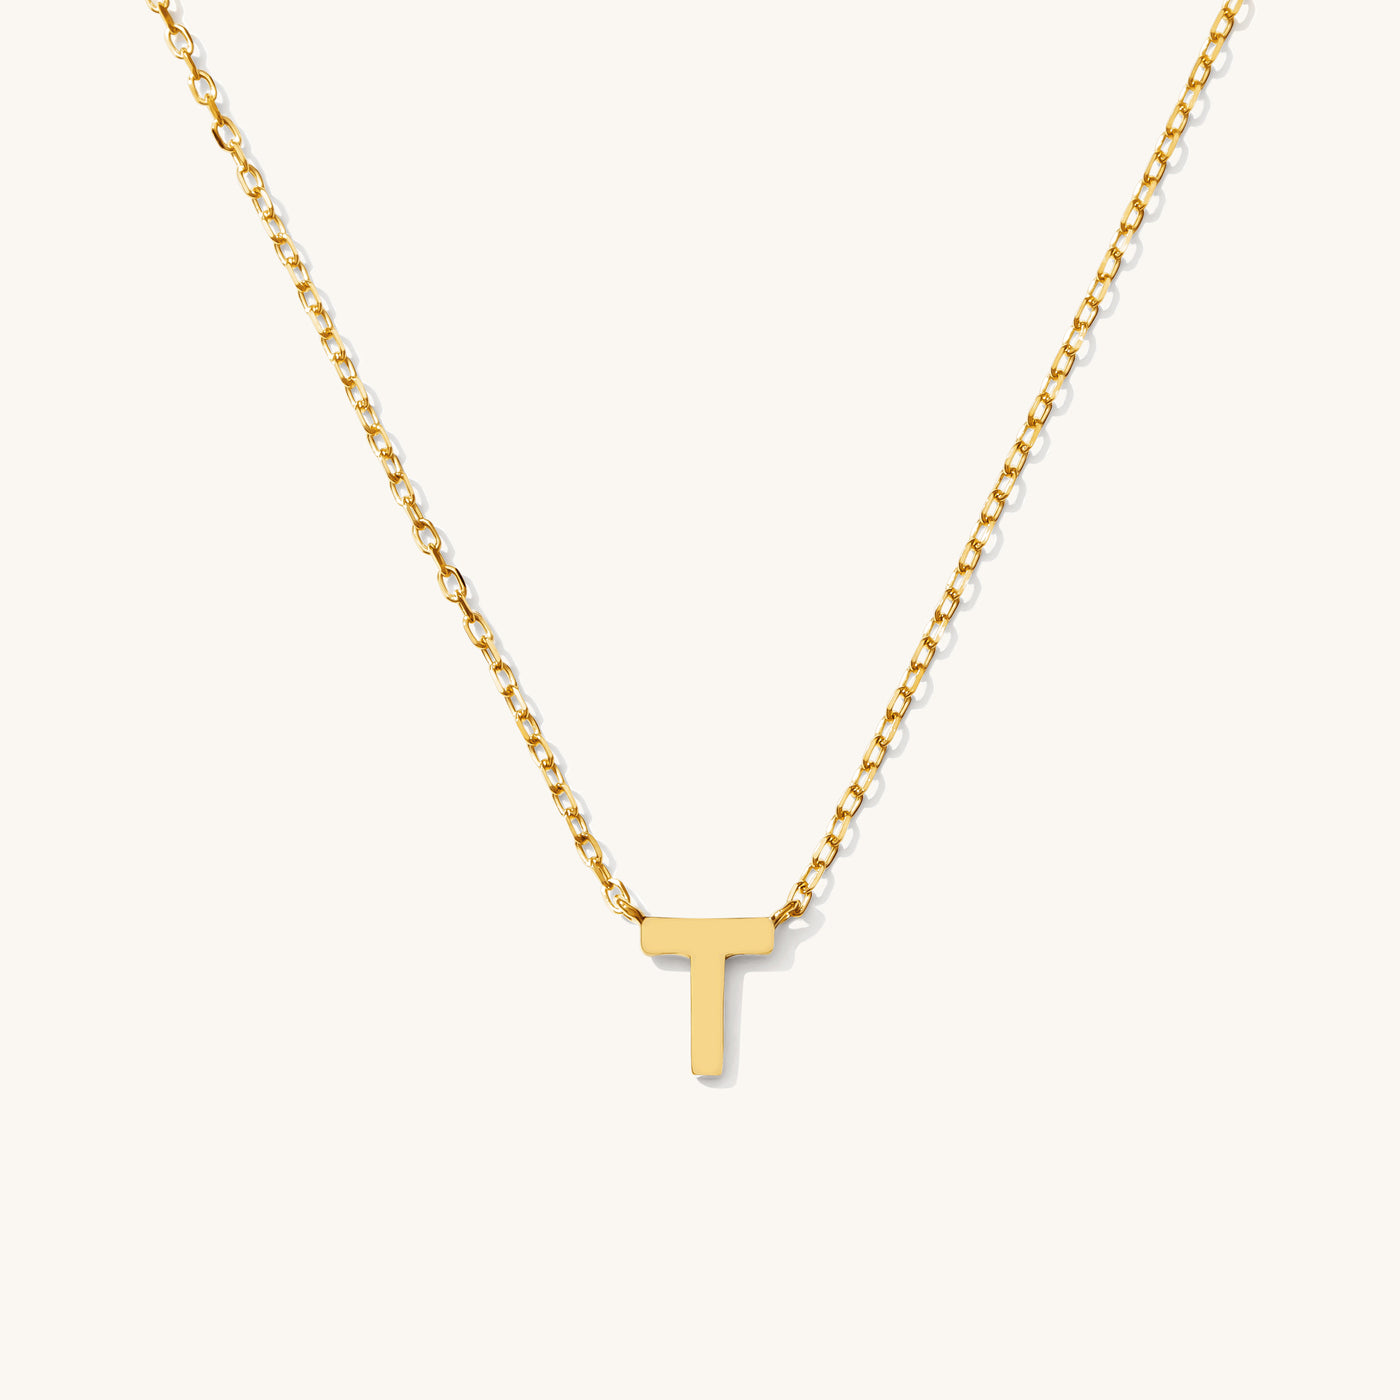 T Tiny Initial Necklace - 14k Solid Gold